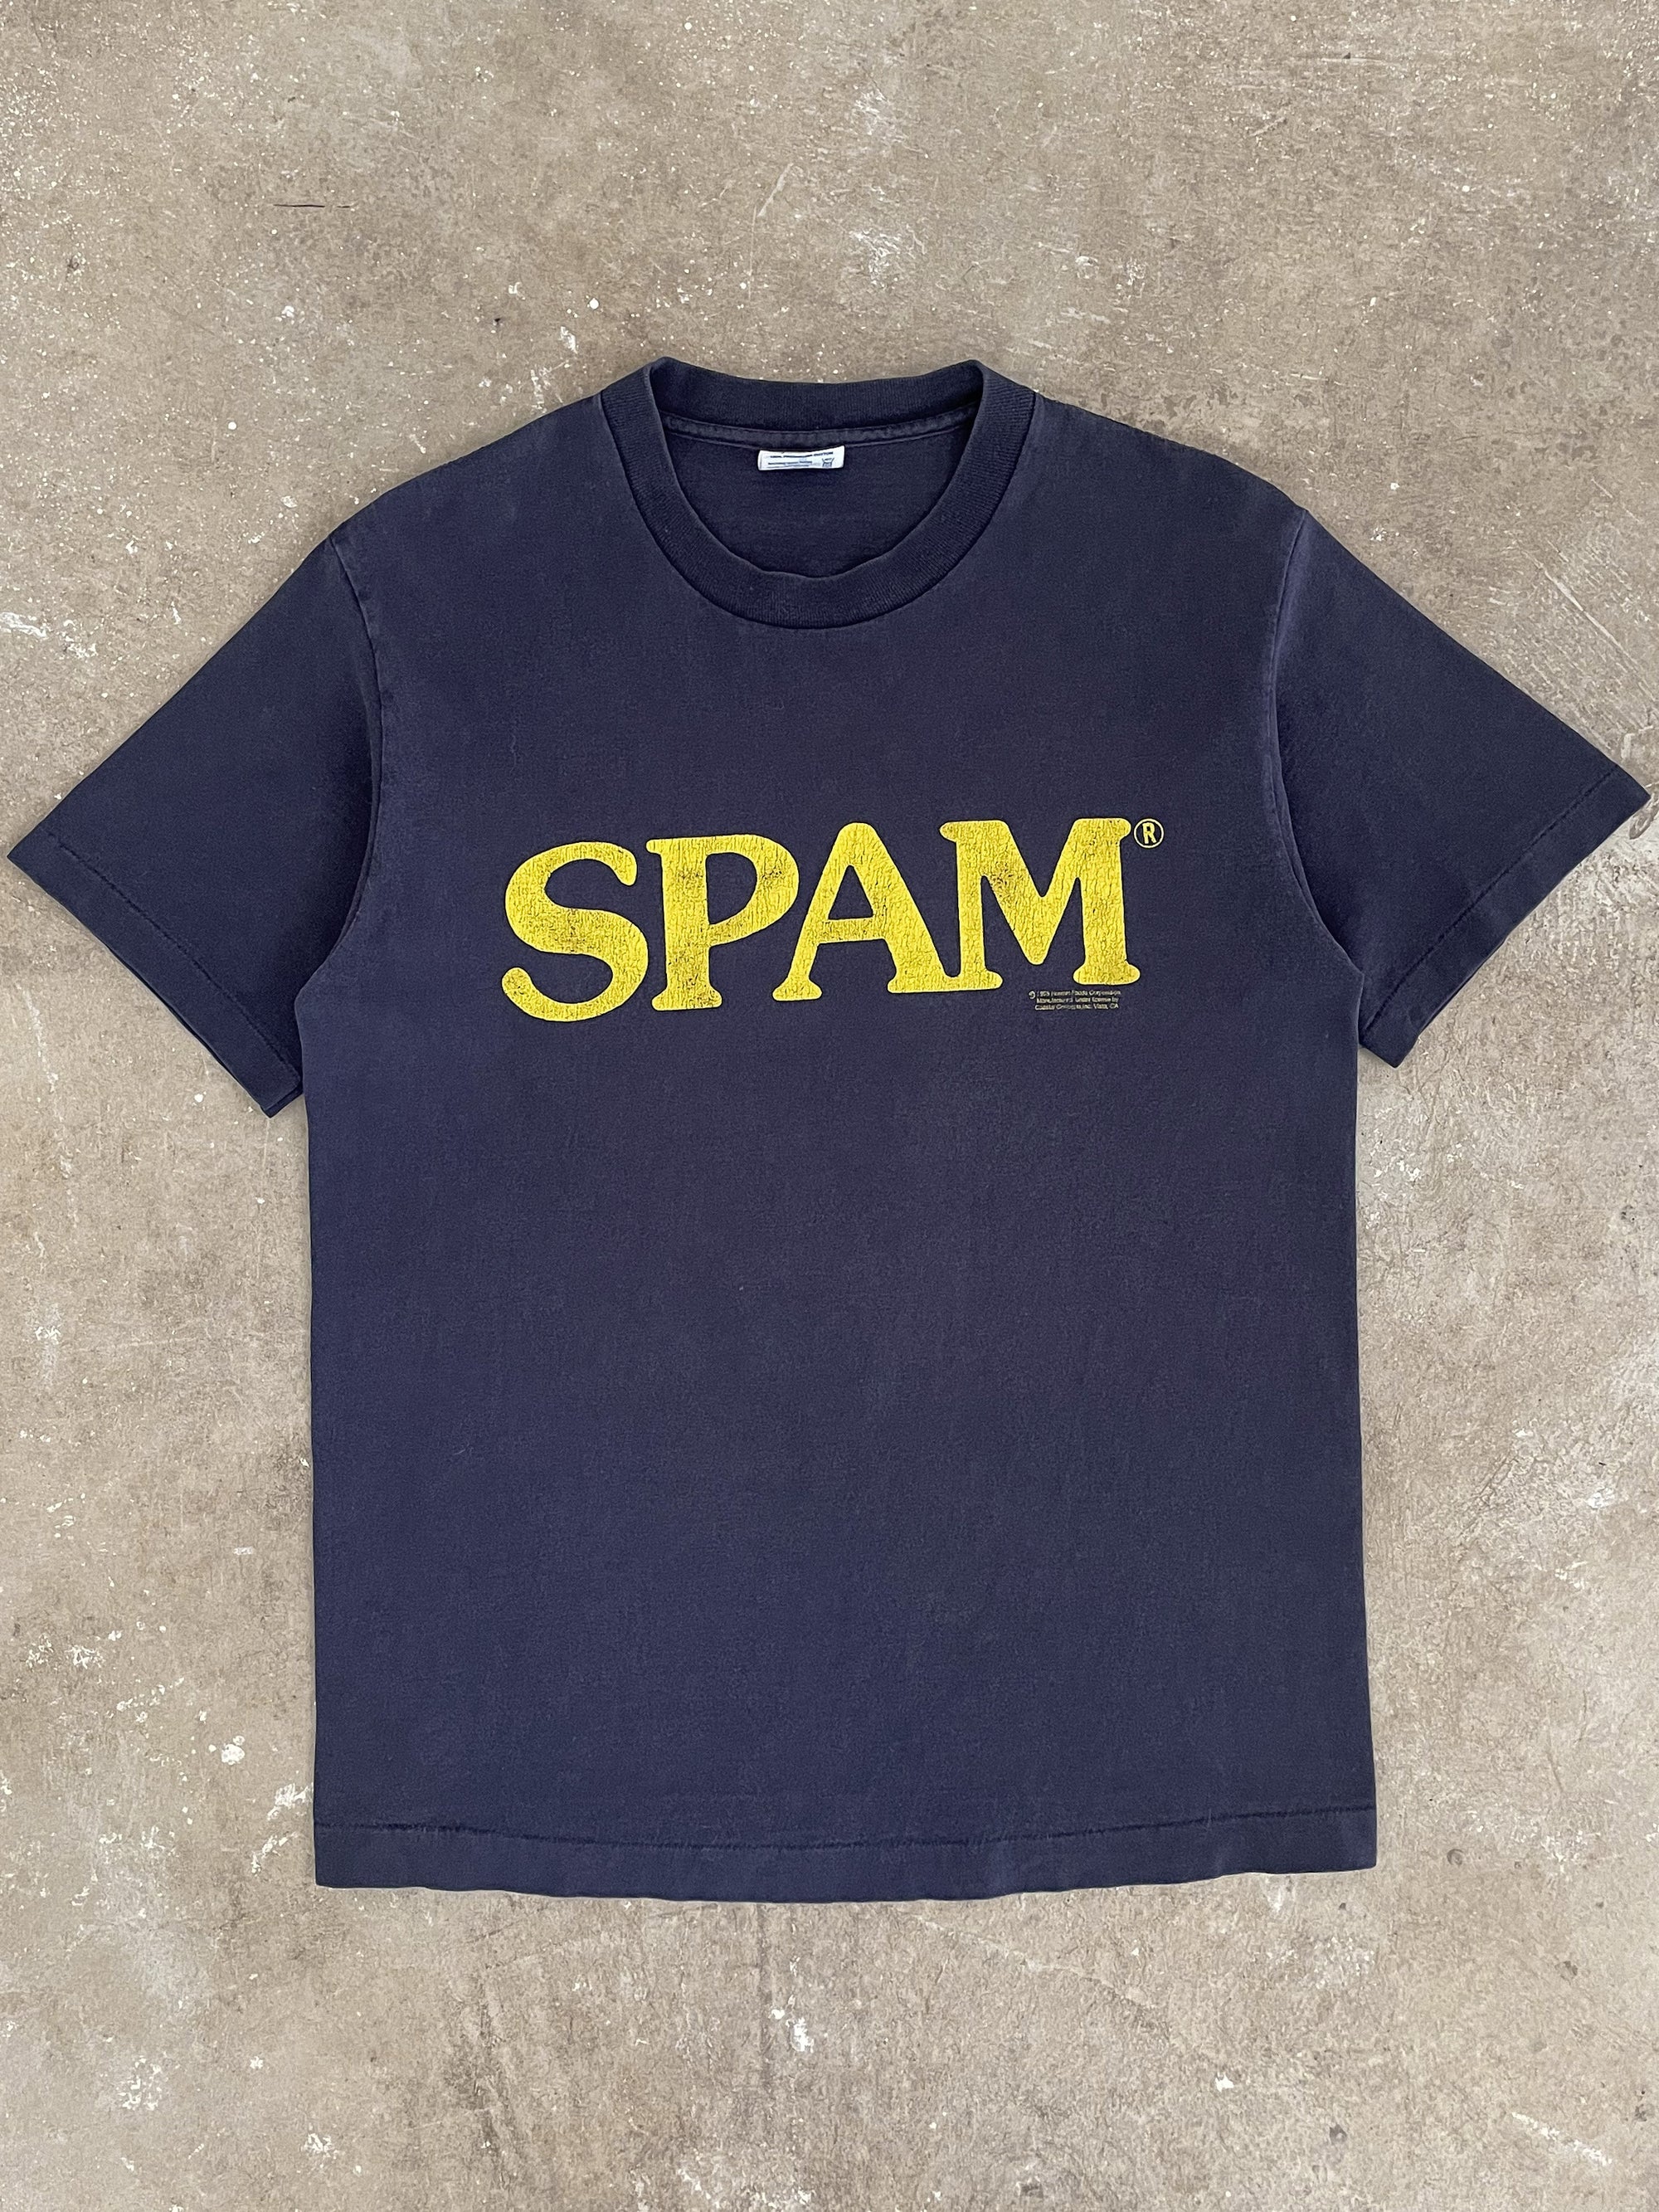 1990s “Spam” Single Stitched Tee (M)